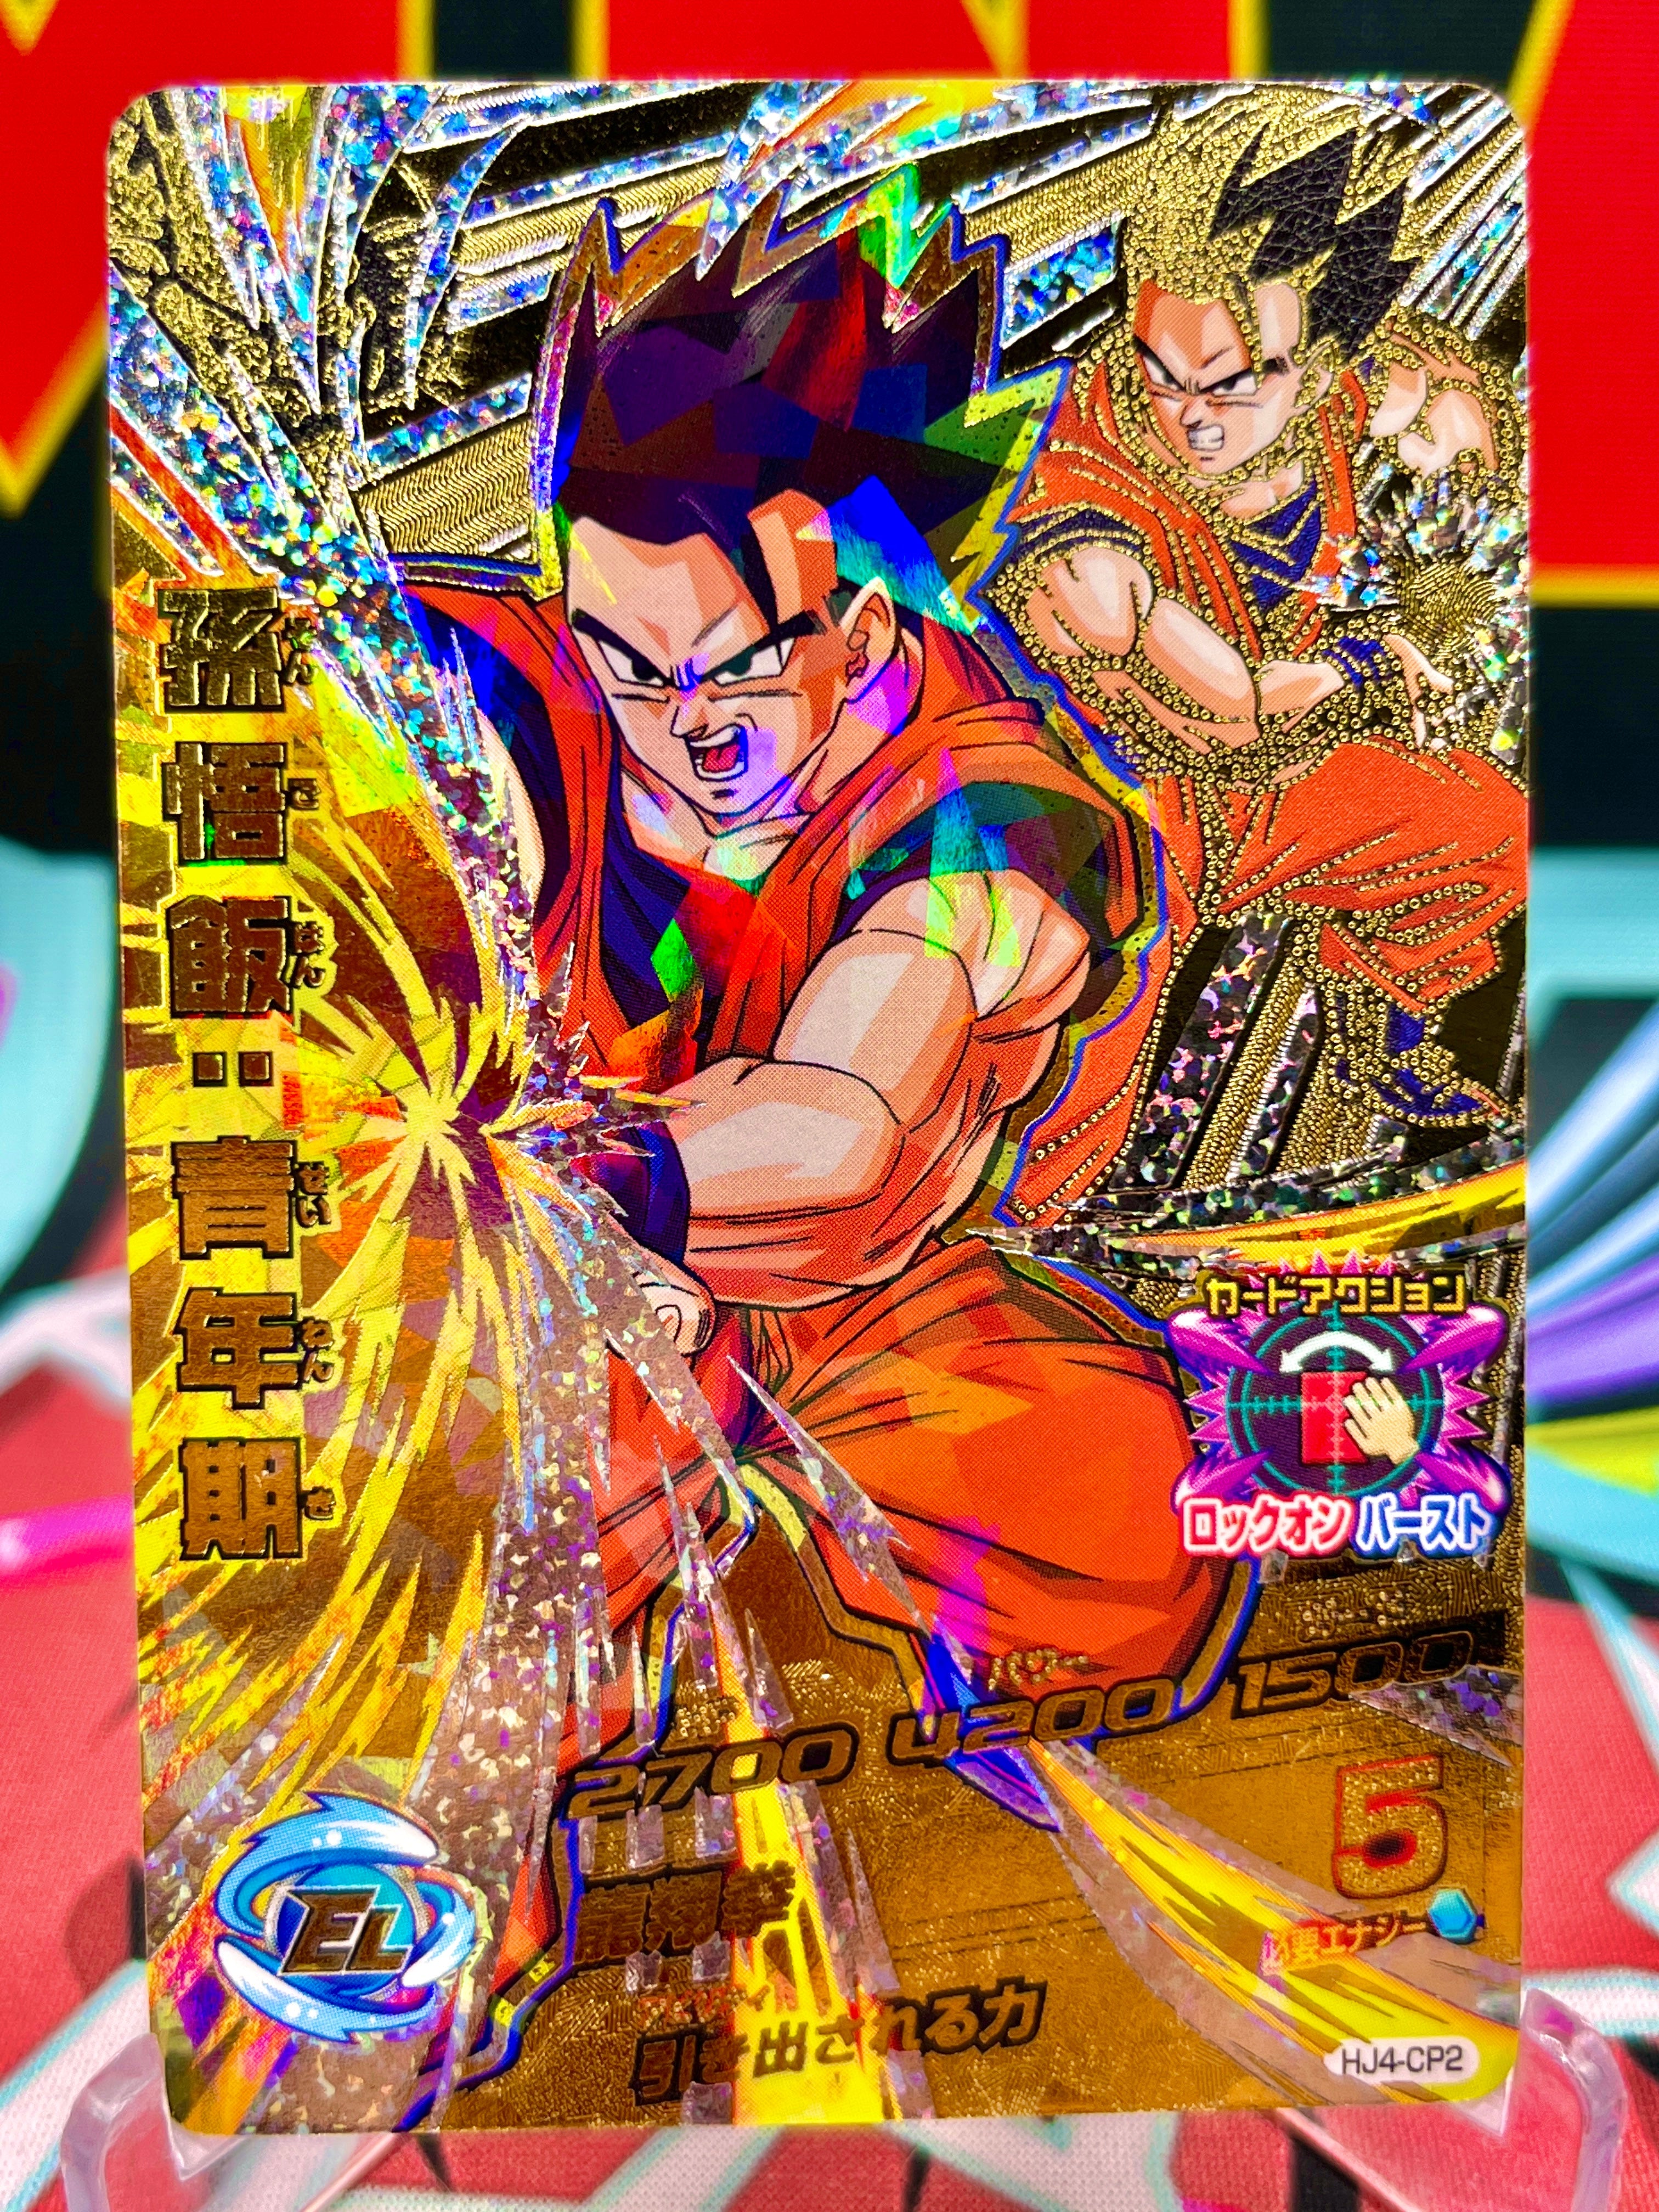 HJ4-CP2 Son Gohan: Youth Vintage CP (2014)